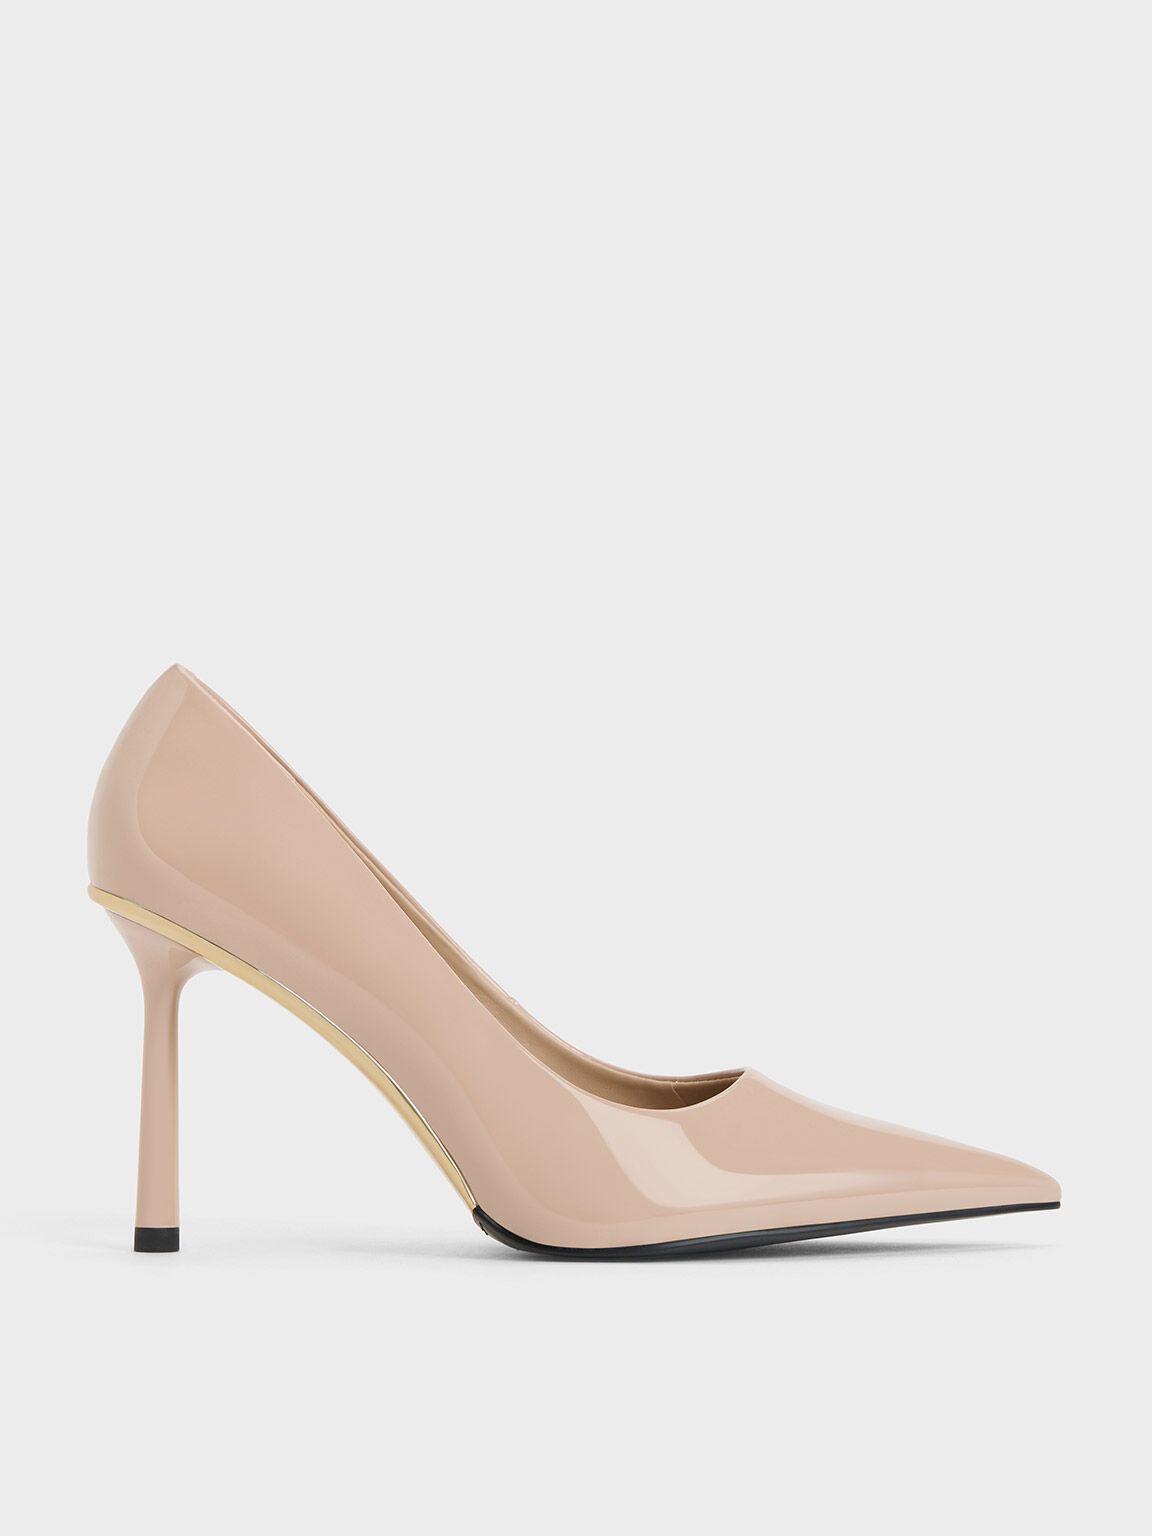 Ada Pink Patent Leather – BY FAR